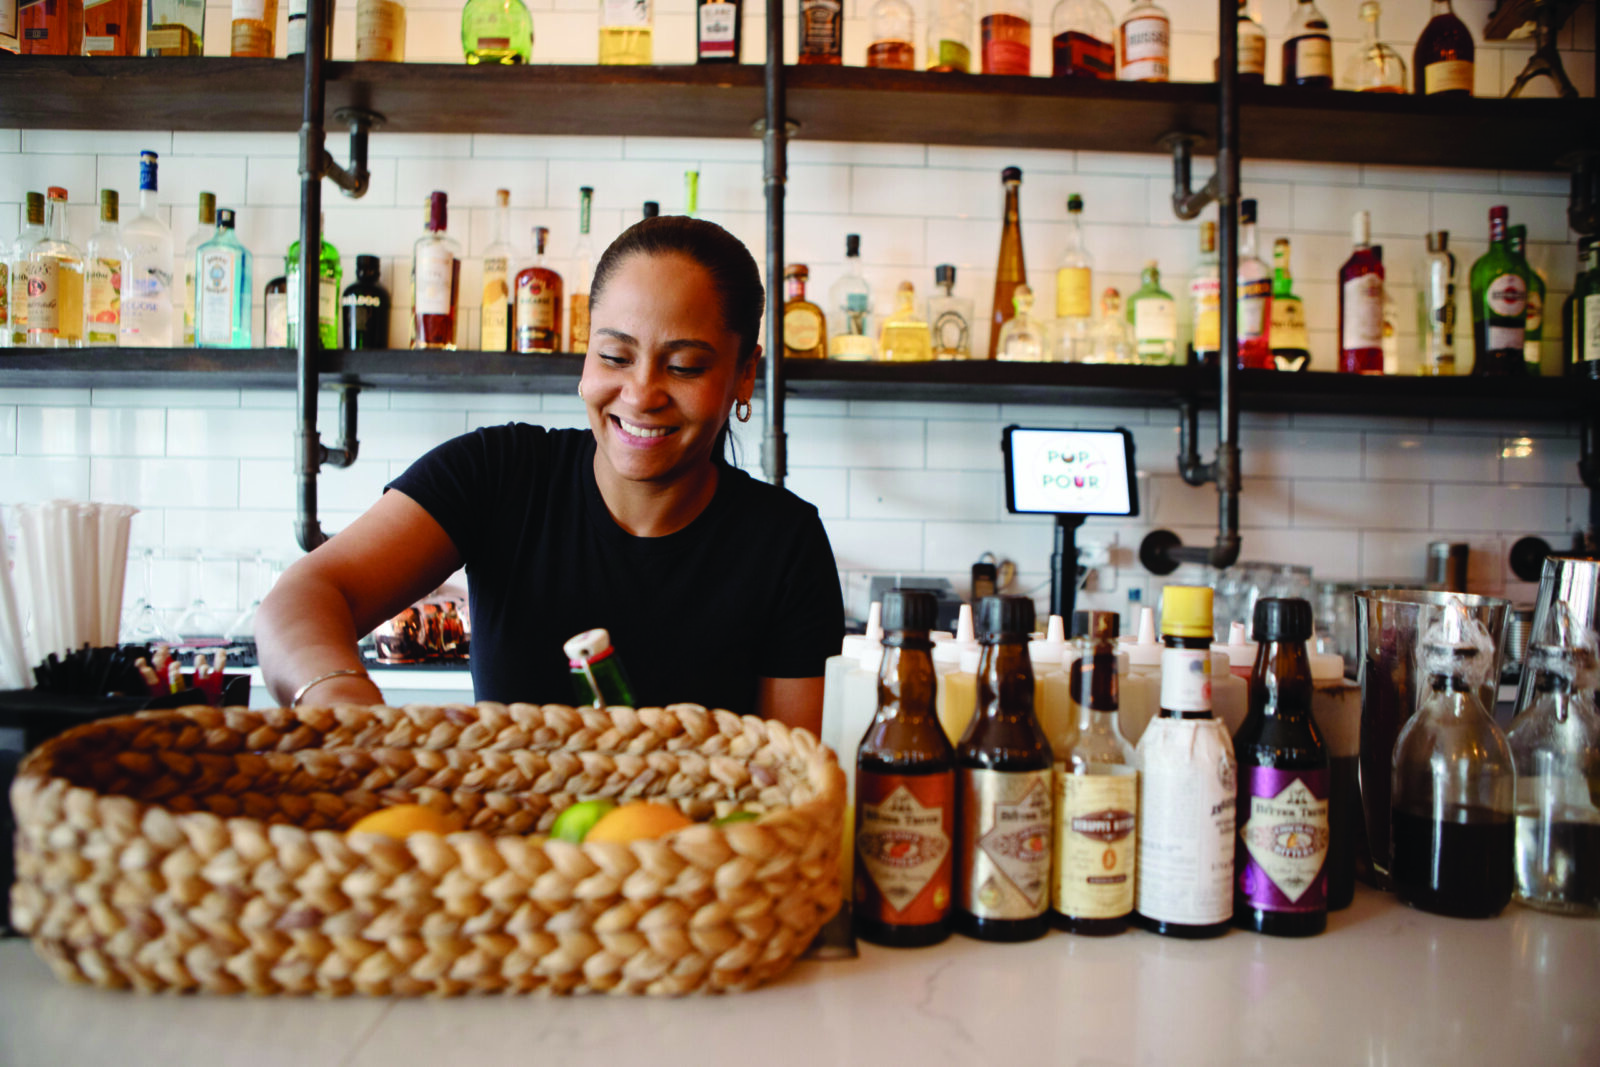 Yajaira smiles down as she works behind the bar, her hands obscured by a basket of fruit. Liquor bottles line the shelves behind her.